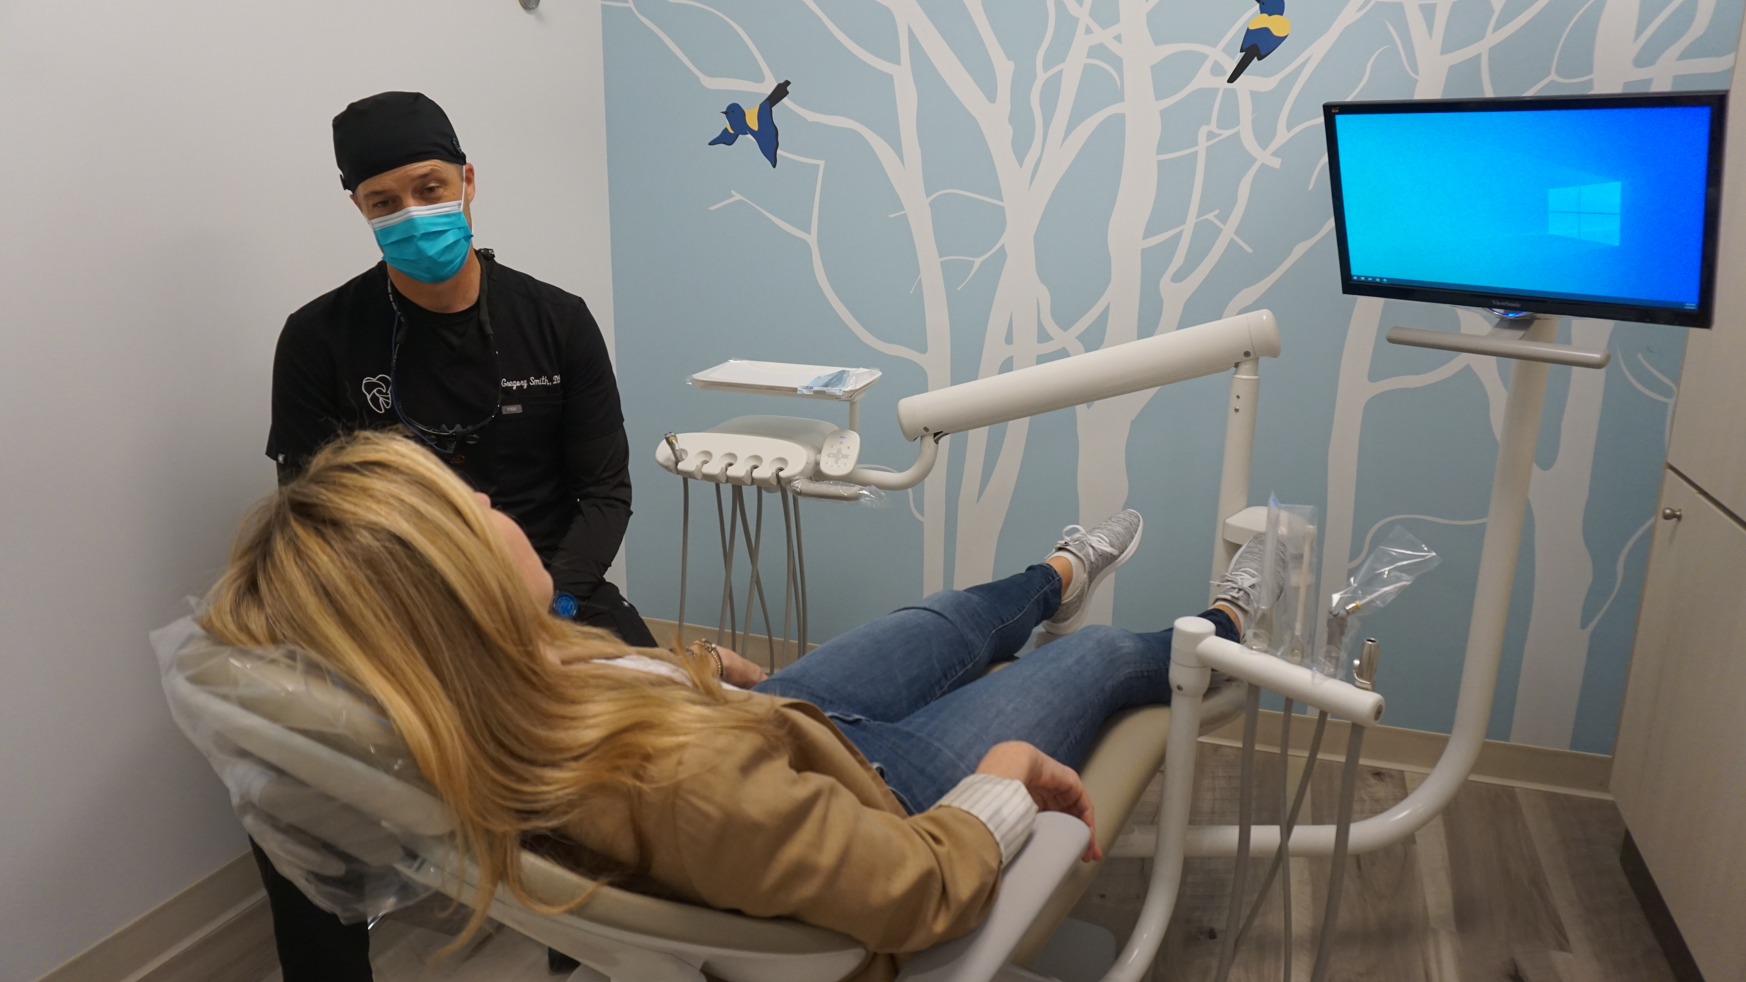 At Aspire Dental & Implants, we make sure our treatment rooms are welcoming to ease any worries you have about visiting the dentist. Dr. Smith and his team will ensure you understand and are comfortable with your treatment plans. Book your dental visit today with our office in San Juan Capistrano.